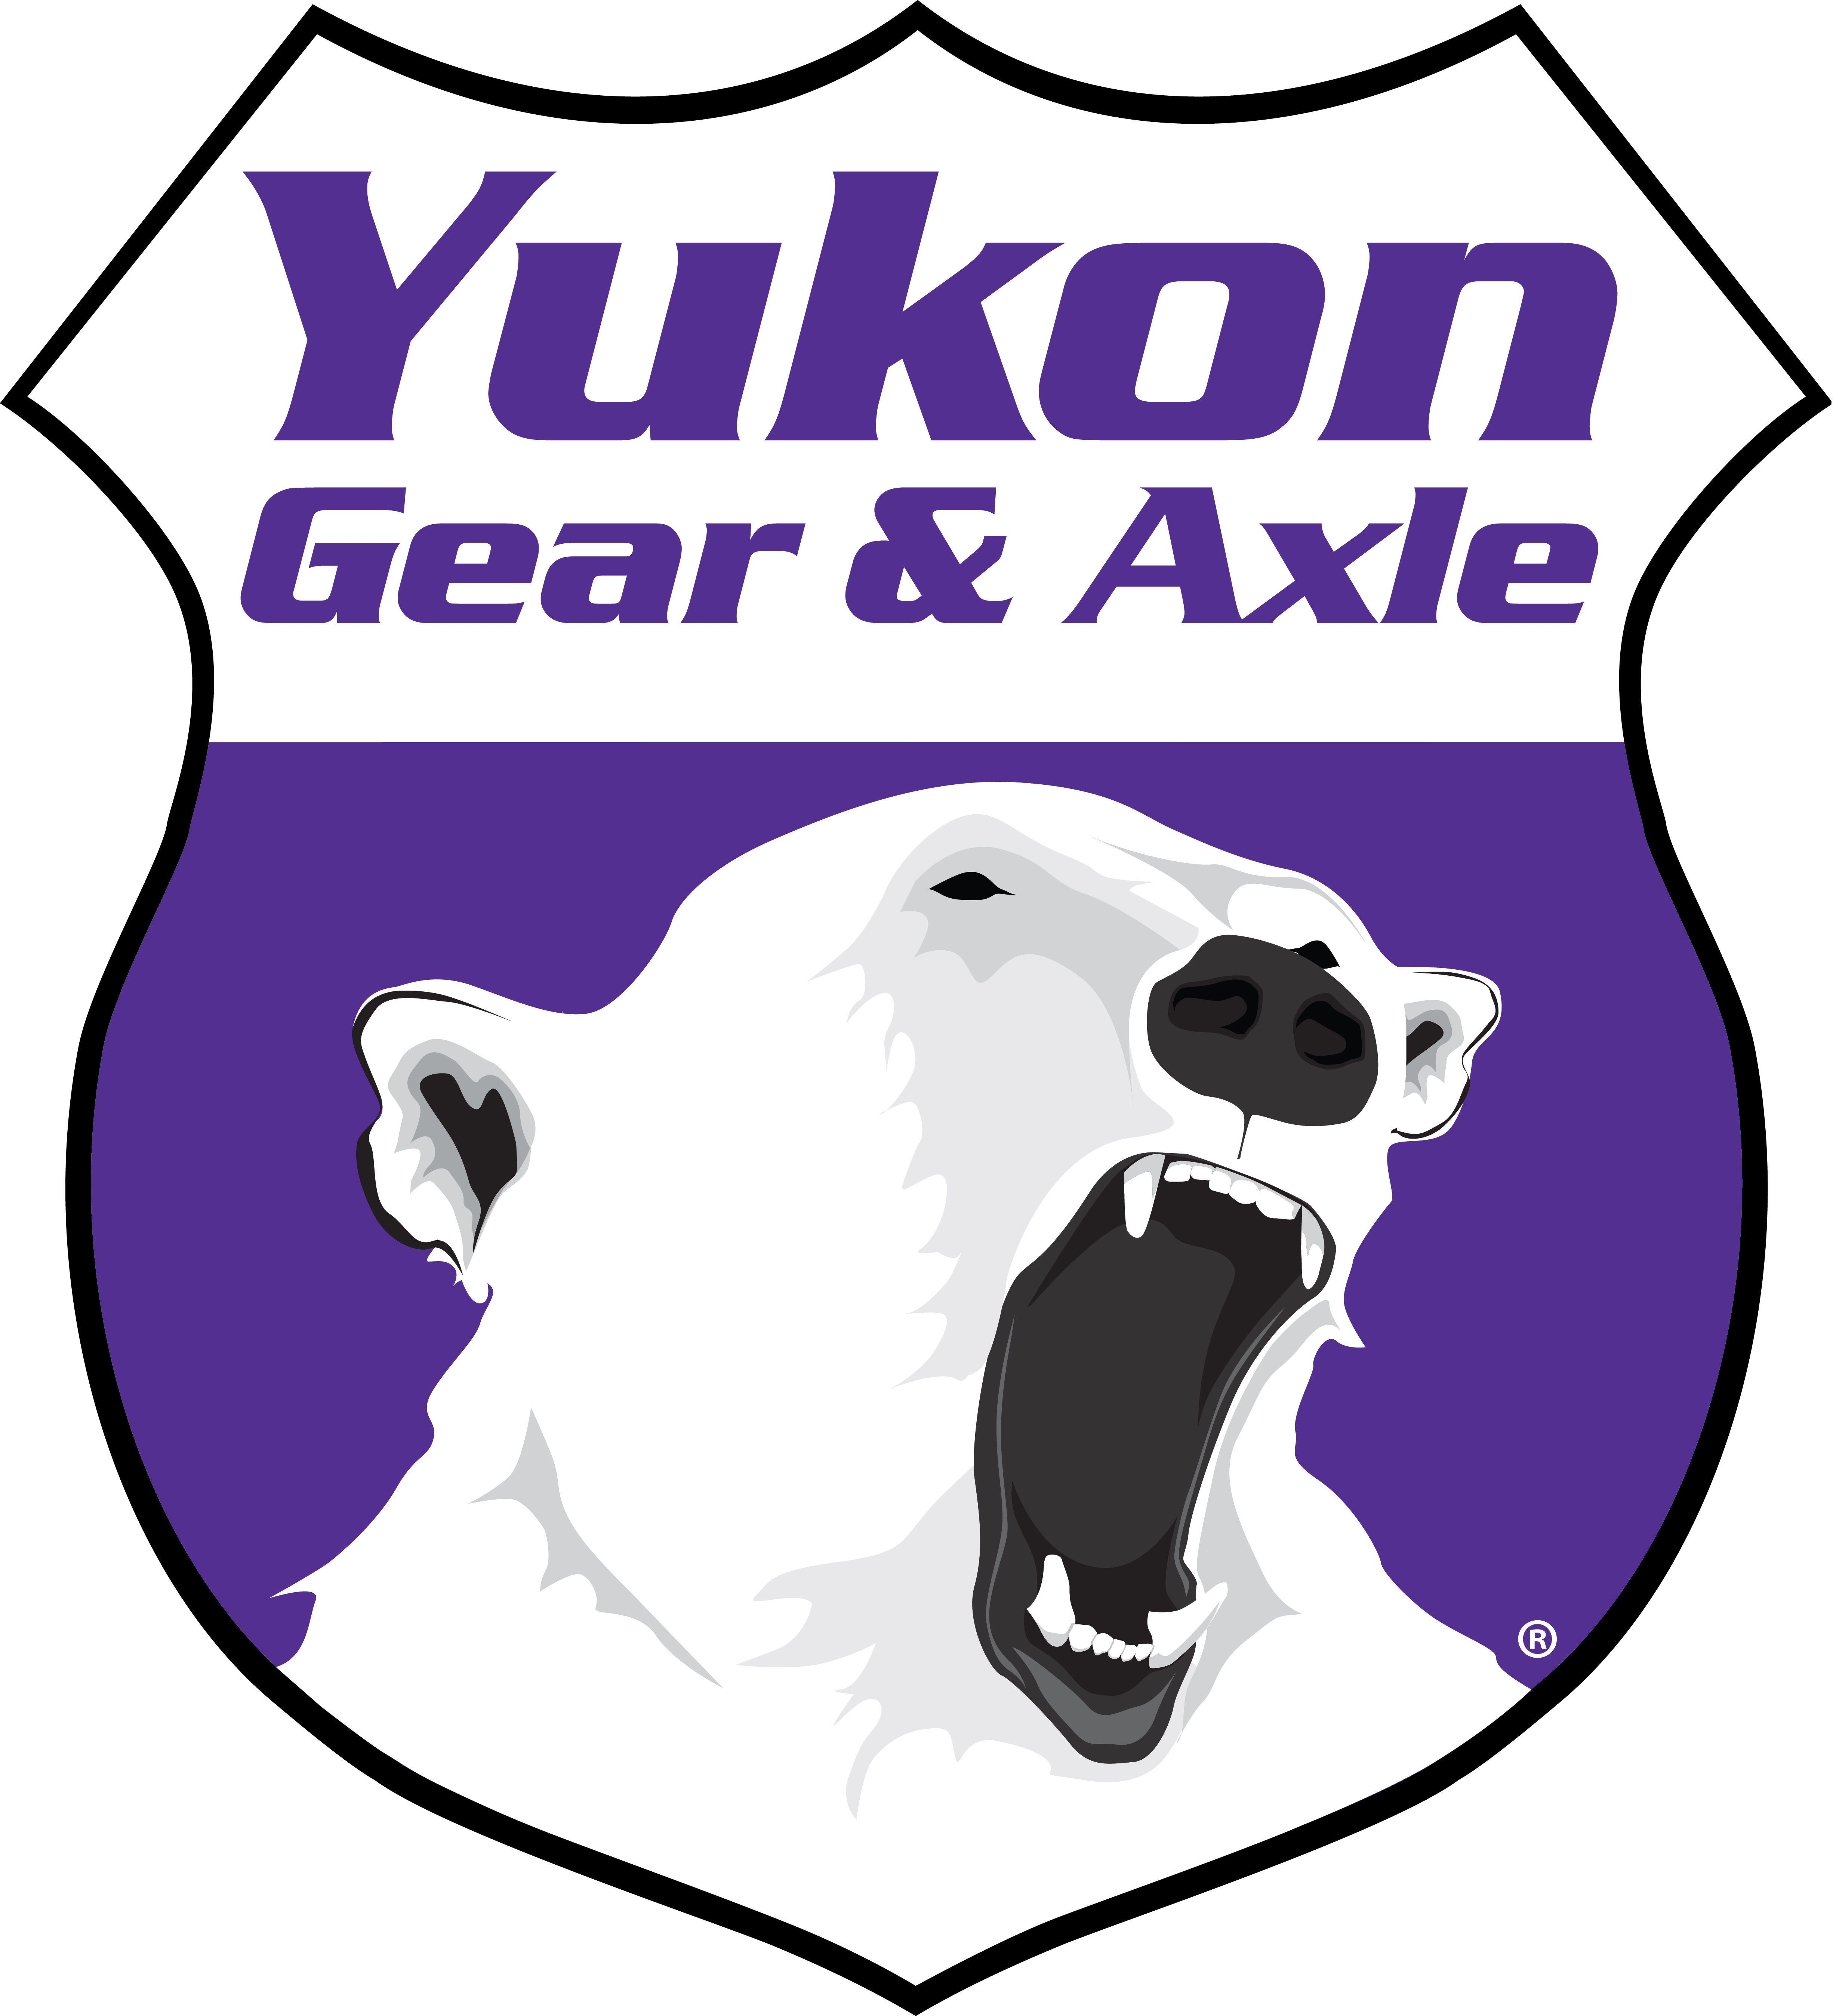 Yukon Minor install kit for Toyota T100 and Tacoma rear differential 